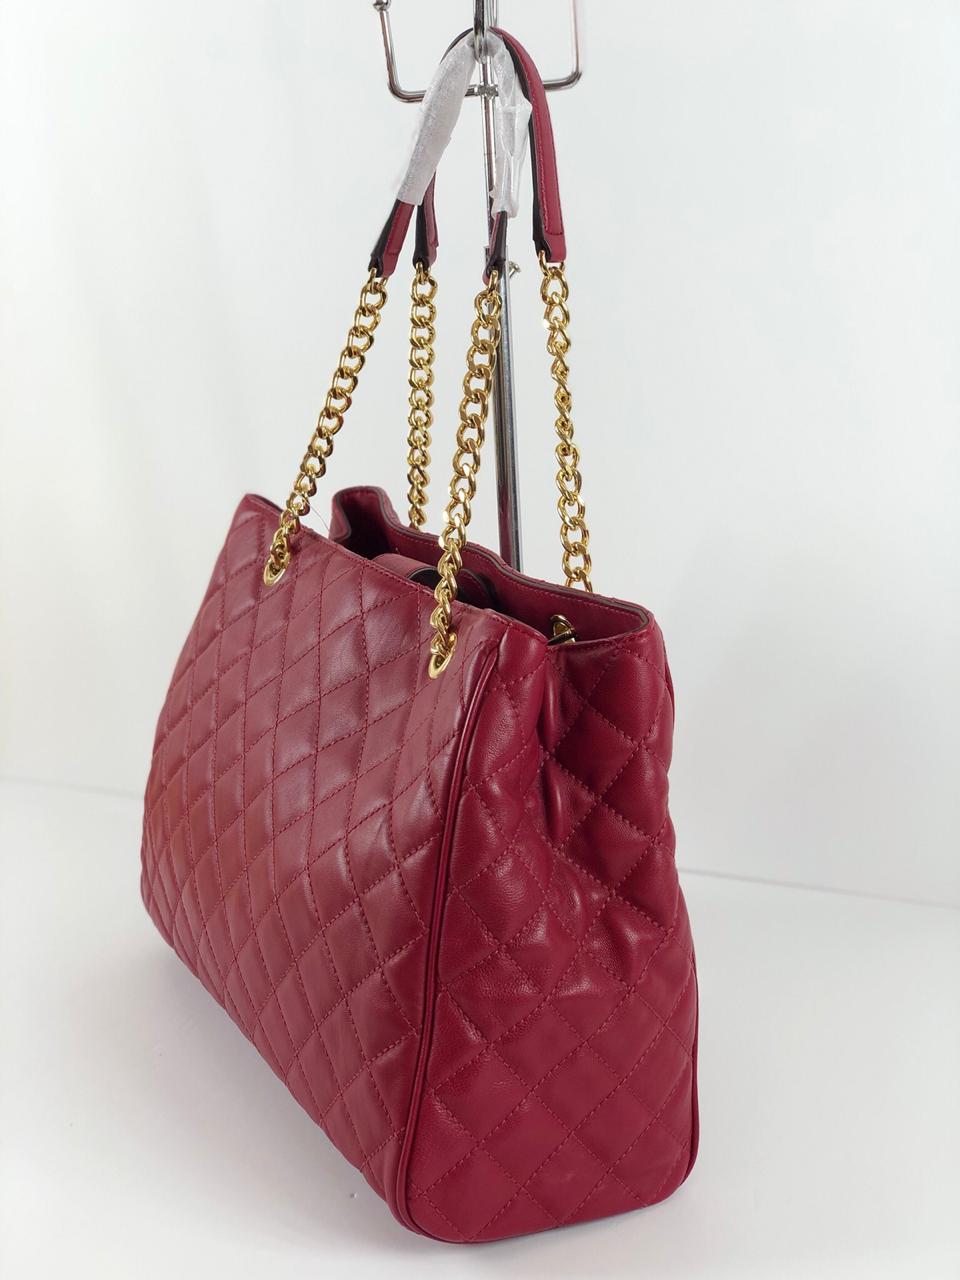 michael kors quilted tote bag